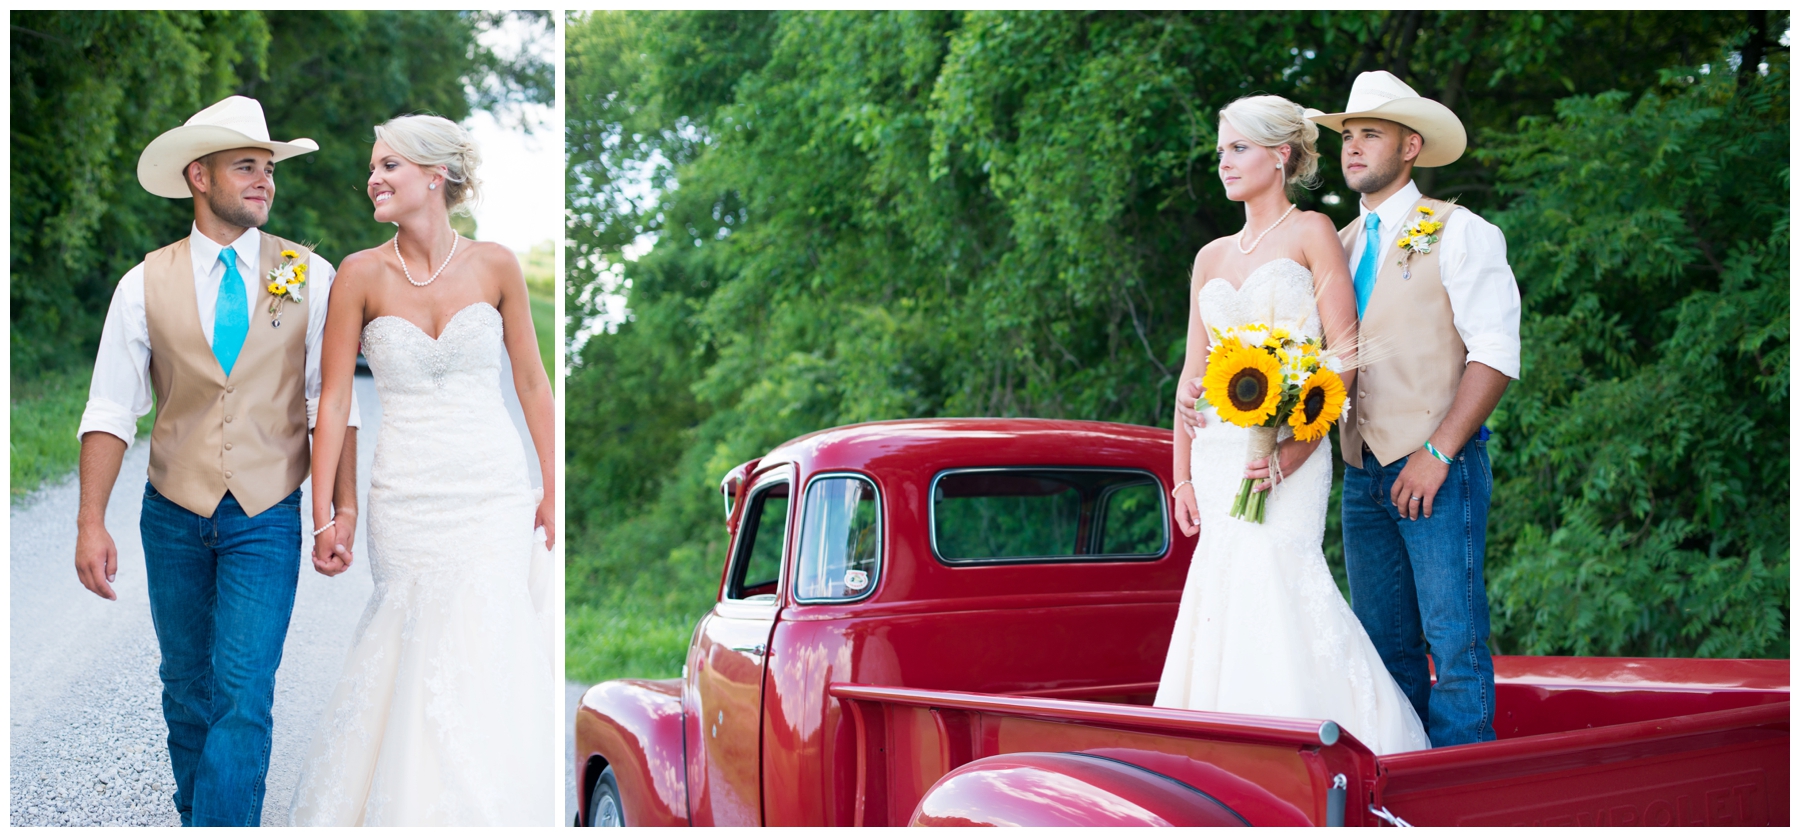 Summer_Country_Wedding_Sunflowers_Red_Chevy_Truck_Red_Barn_Farm_Outdoor_Smoker_Lace_Cowboy_Hat_Country_Wedding_Inspiration_Weston_Missouri